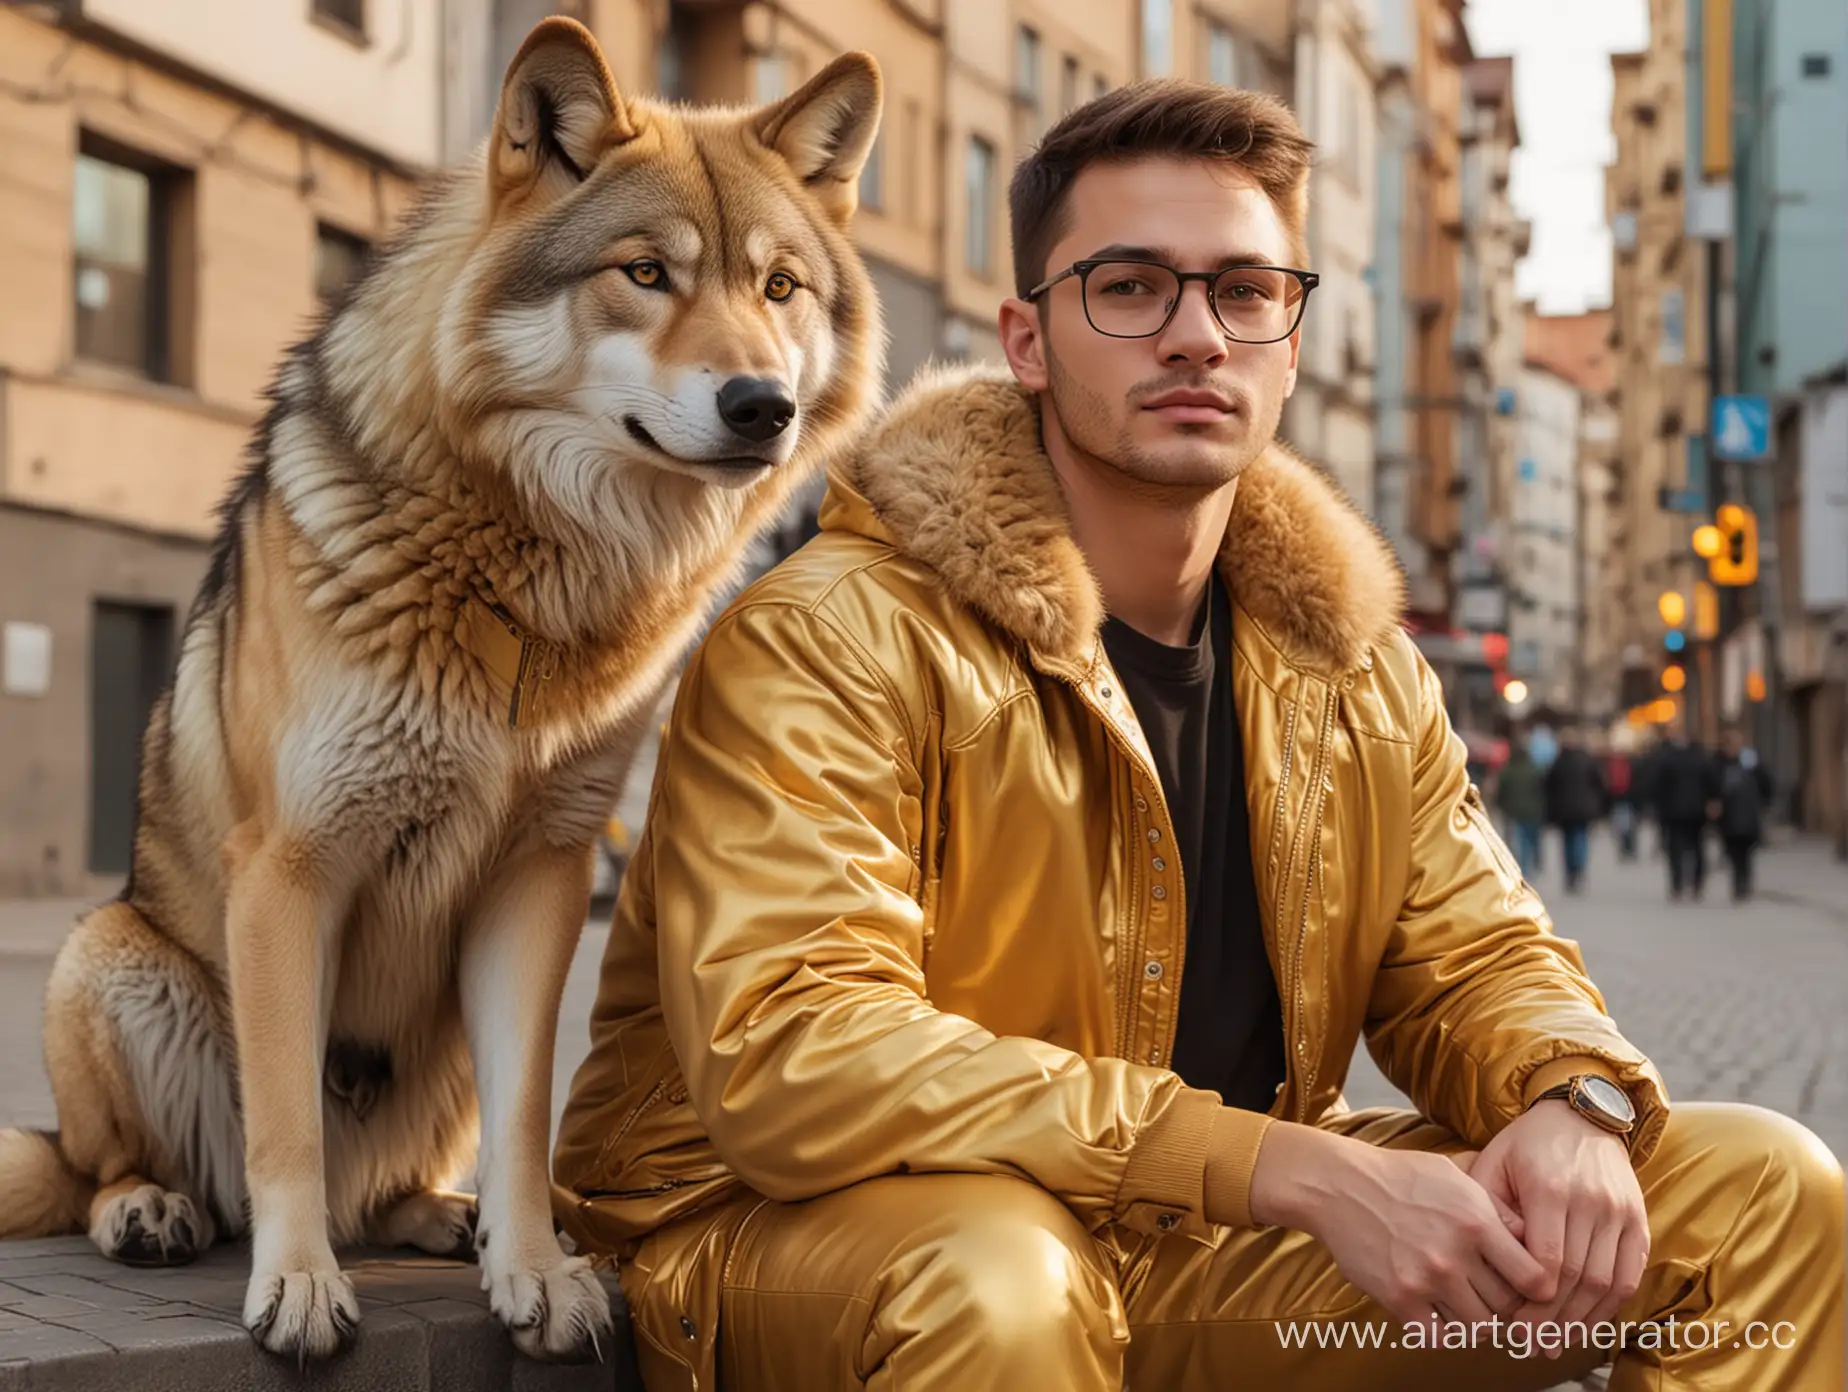 Urban-Intellectual-in-Gold-Jacket-with-Wolf-Companion